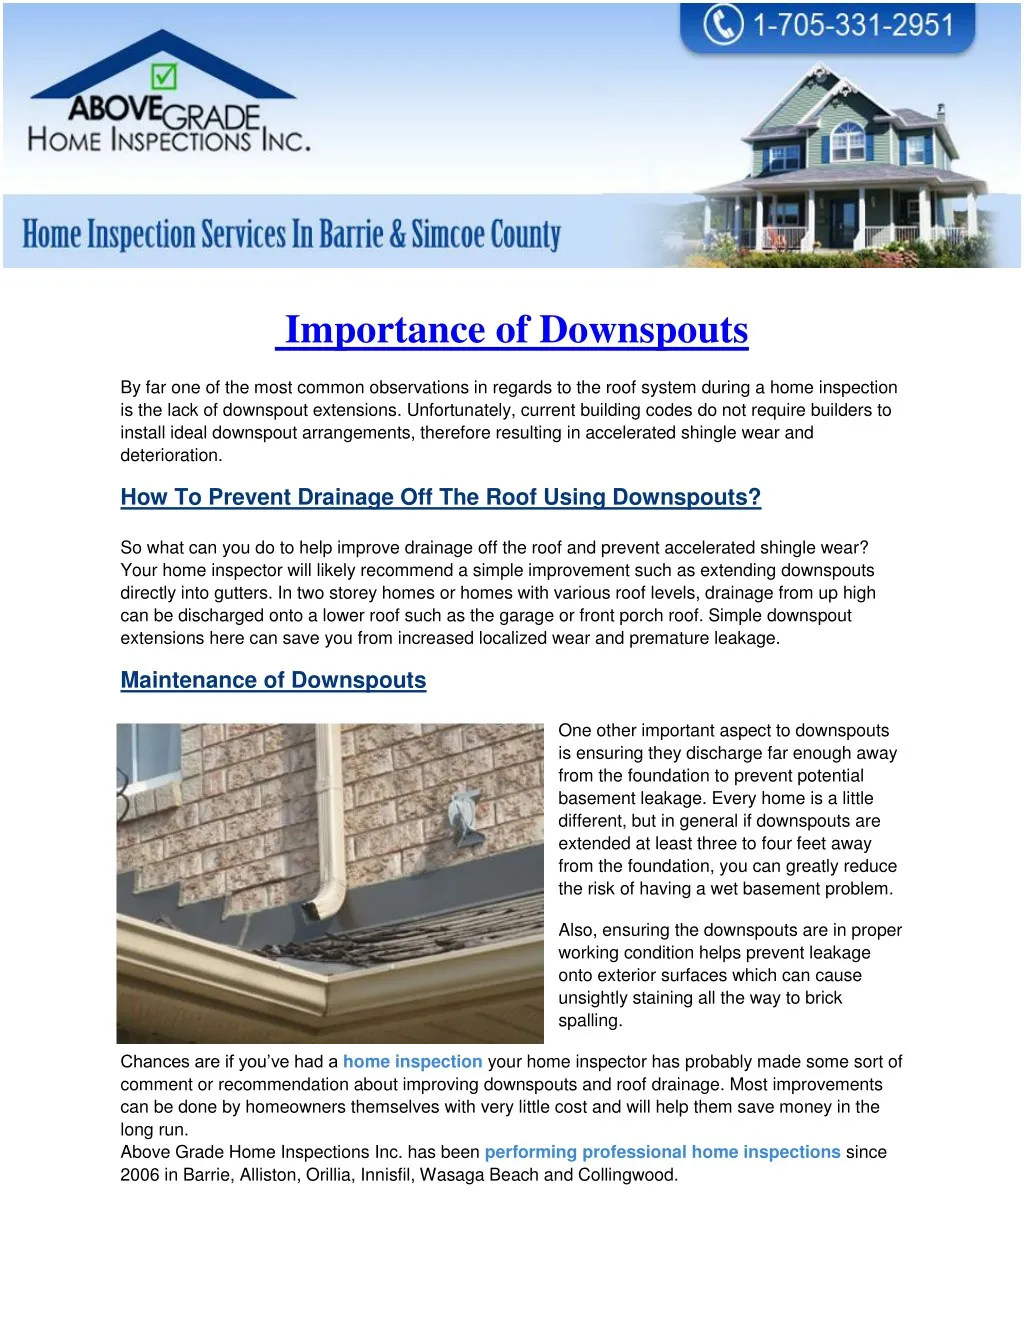 importance of downspouts